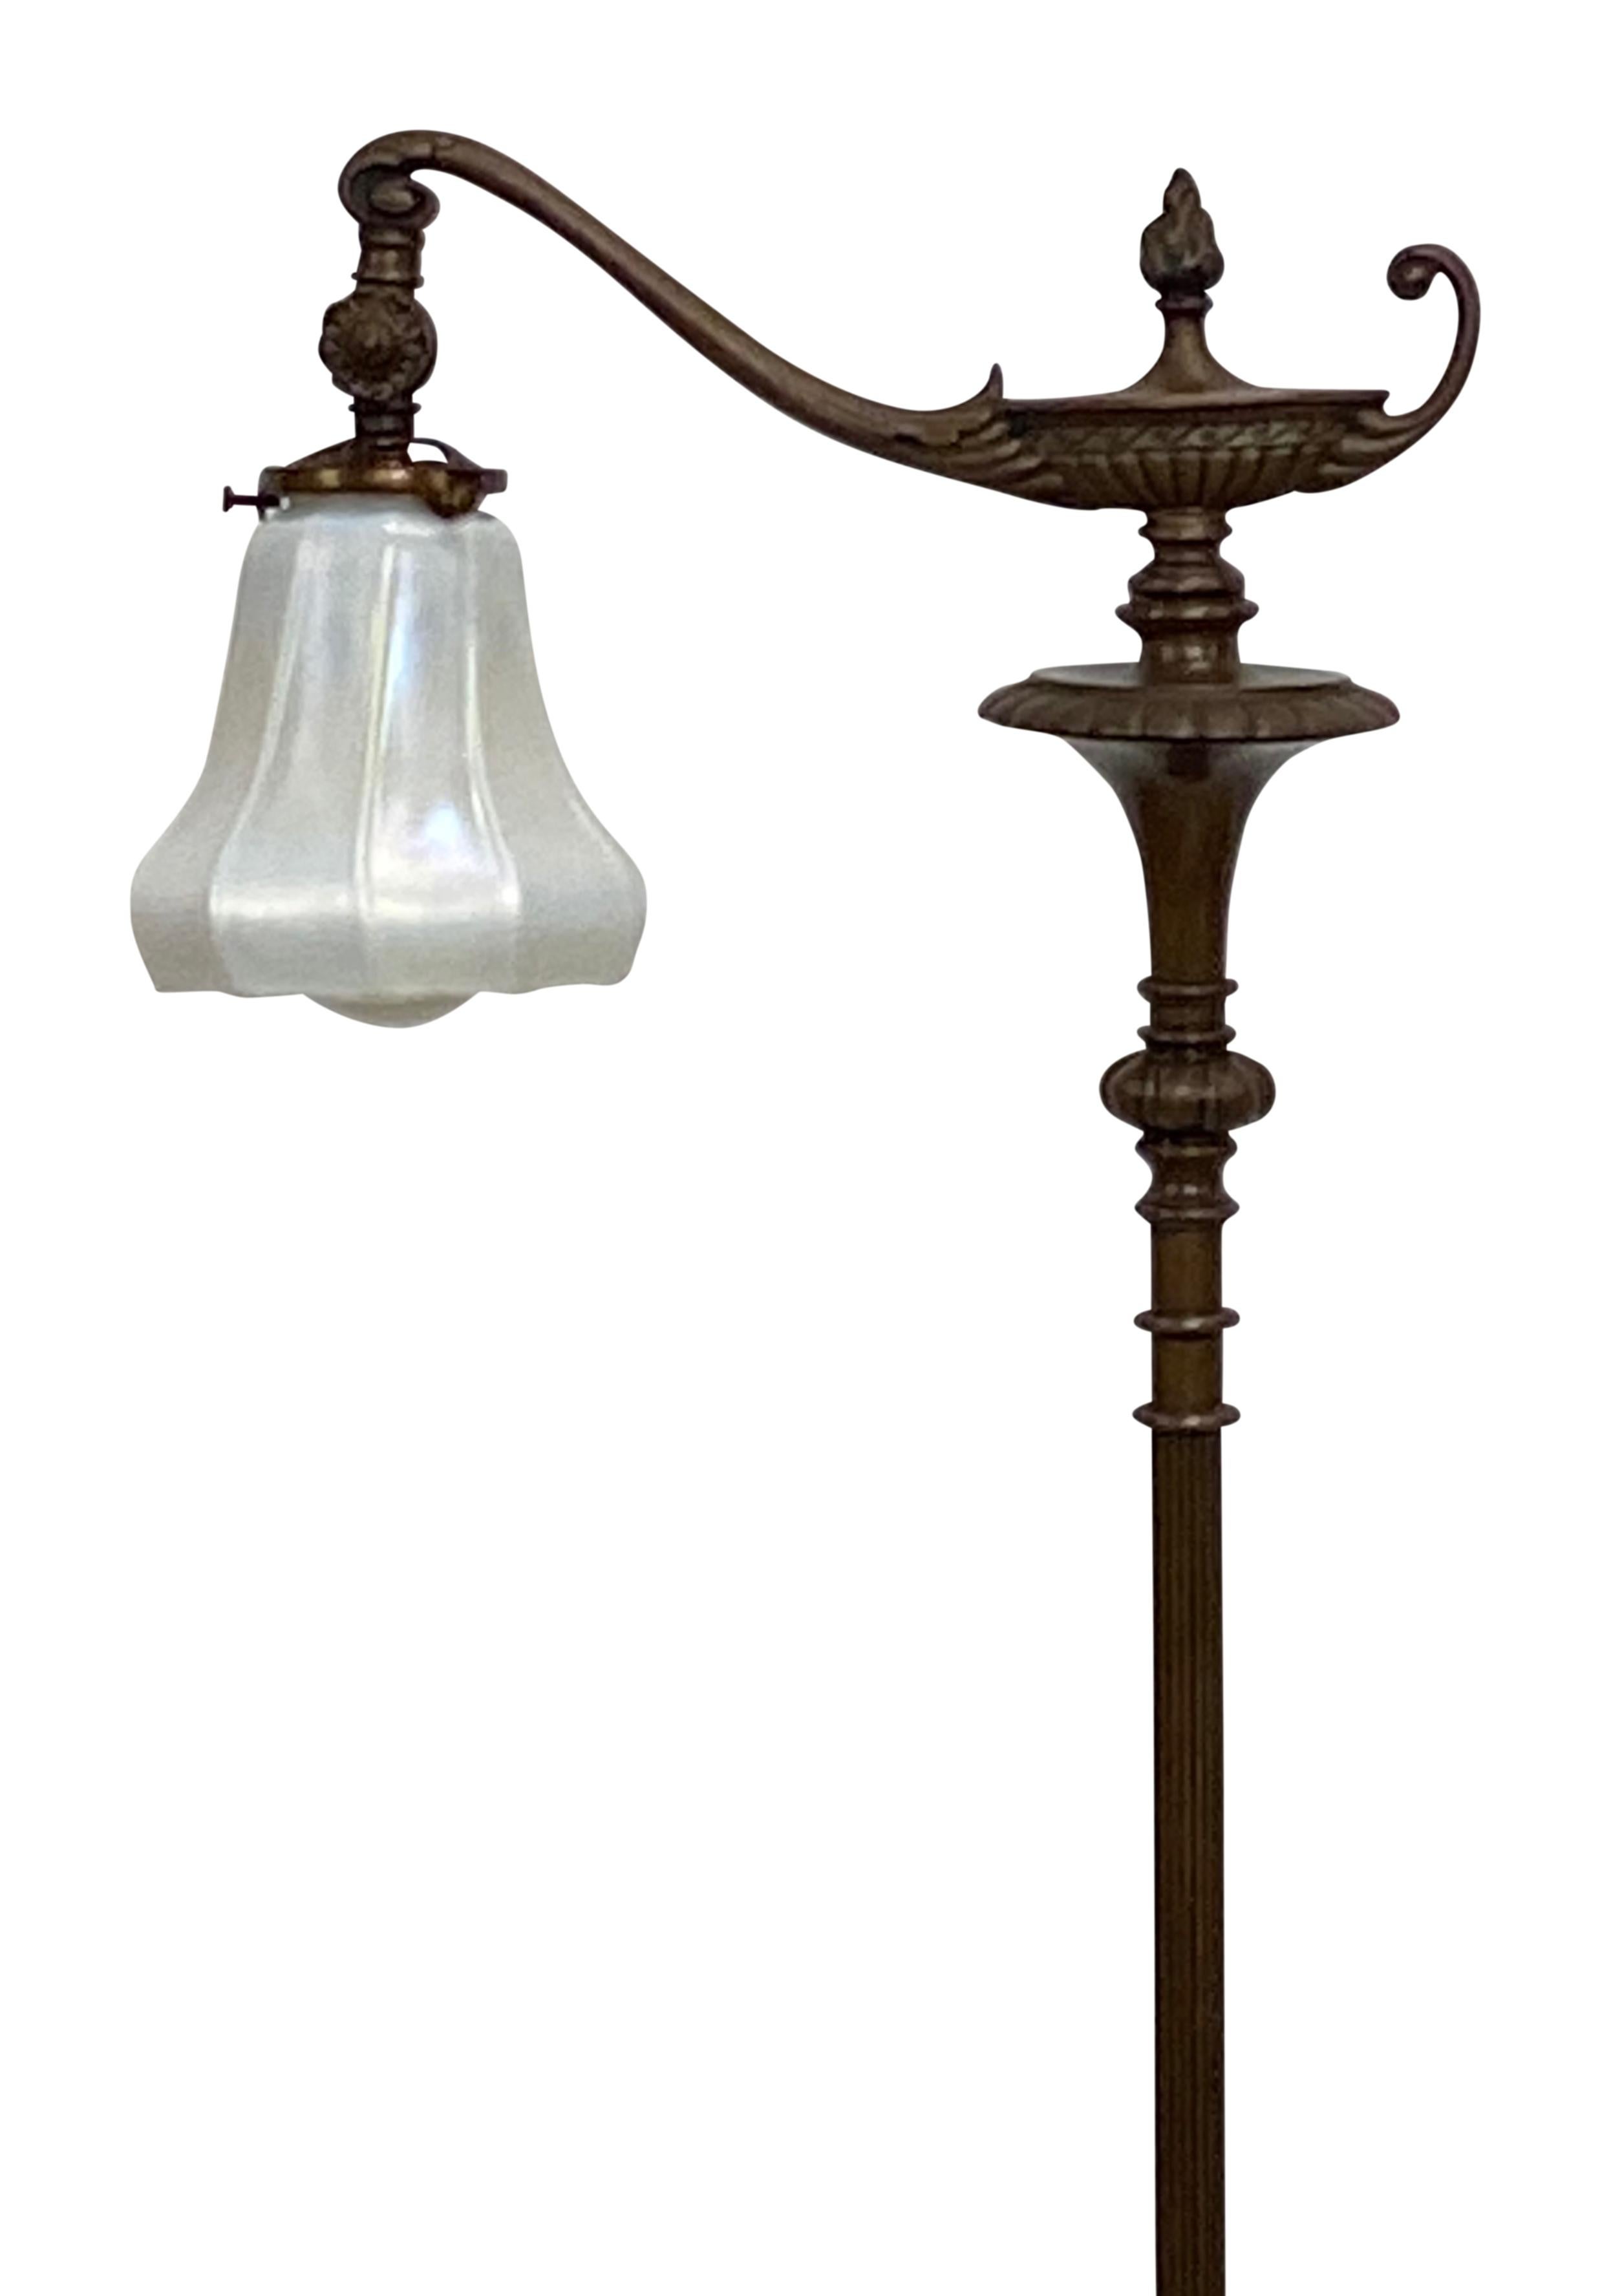 Beautiful quality solid bronze floor lamp with antique calcite art glass shade.
American, early 20th century. 
Recently re-wired.